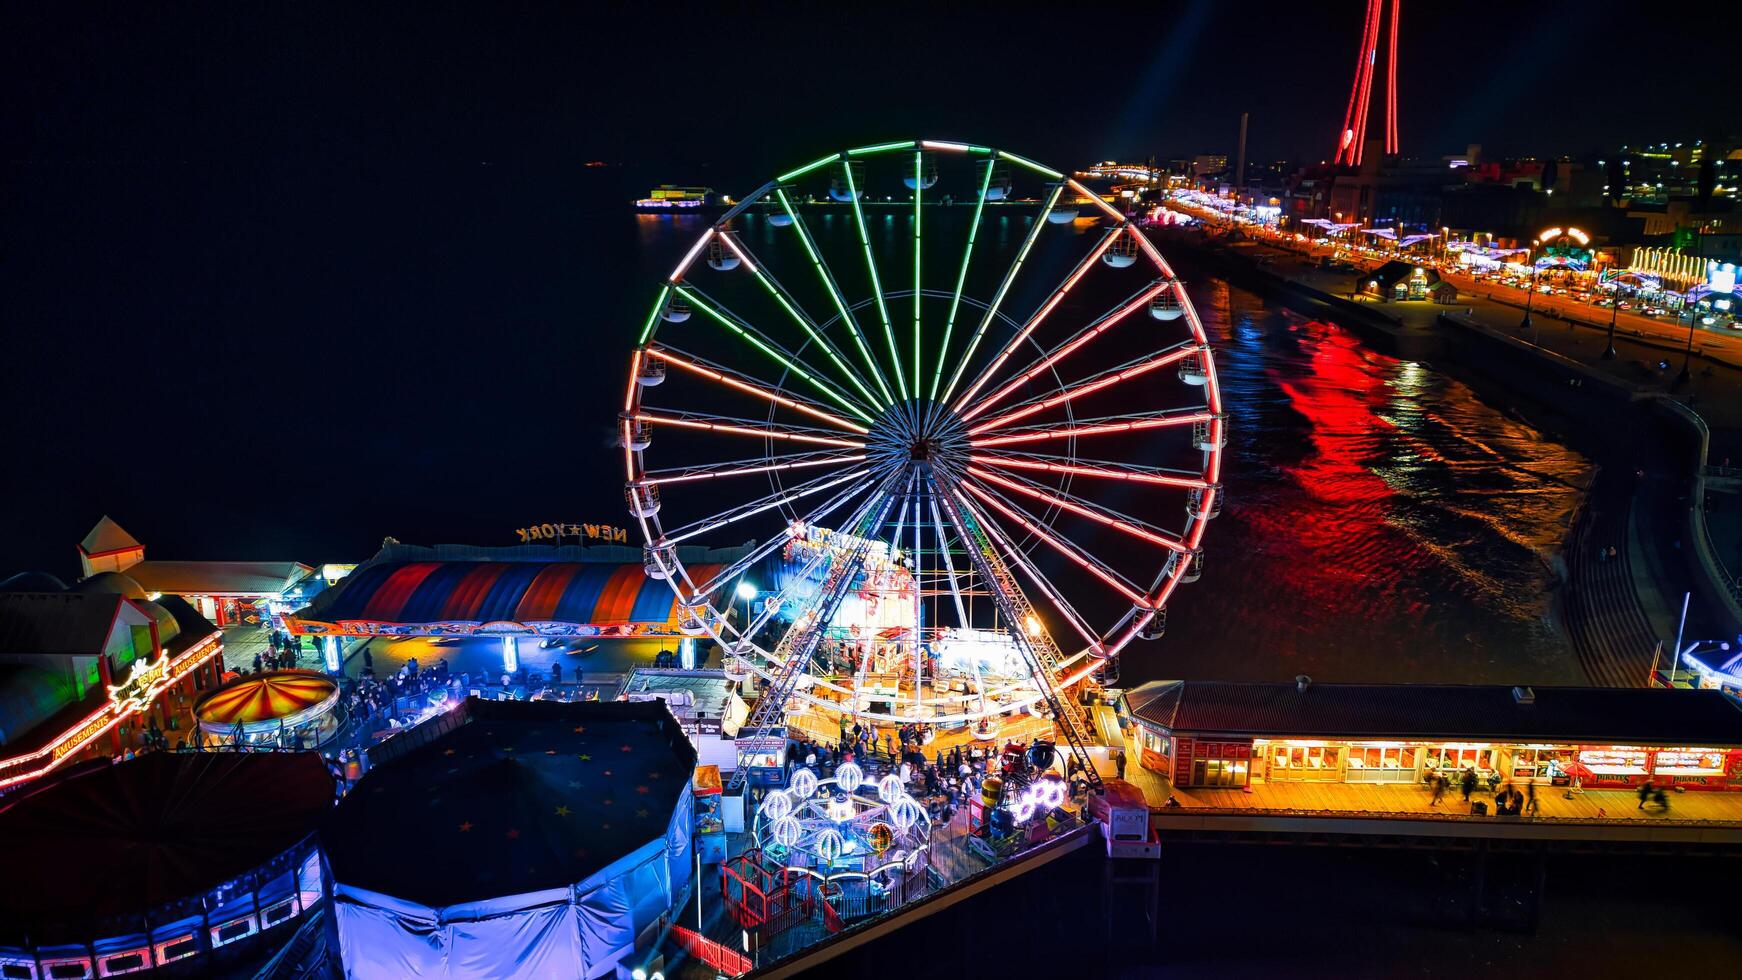 Colorful night view of a vibrant amusement park with a Ferris wheel and bright lights reflecting on water in Backpool, England. photo